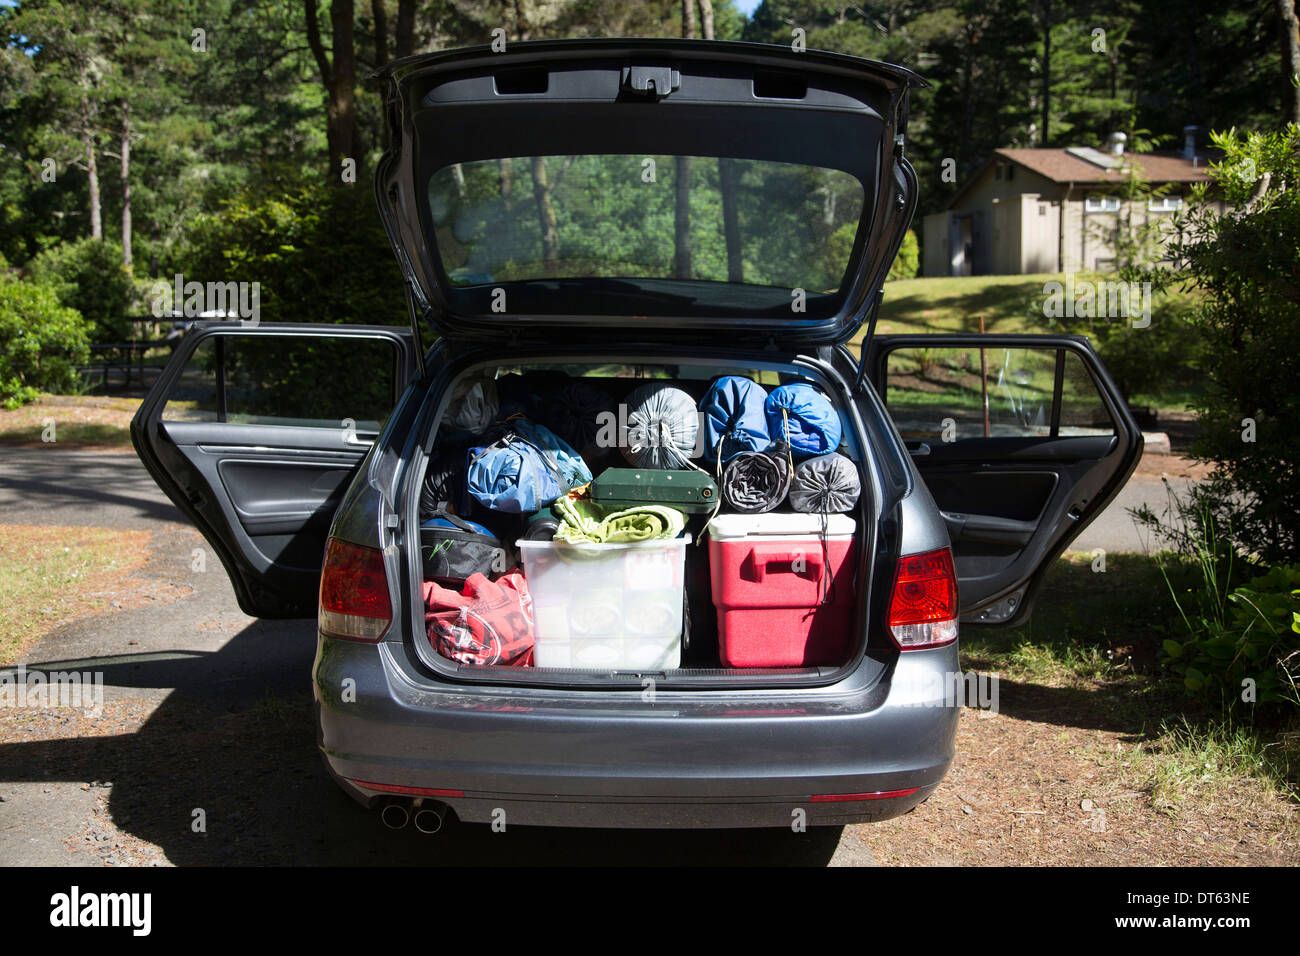 Packed full car boot trunk -Fotos und -Bildmaterial in hoher